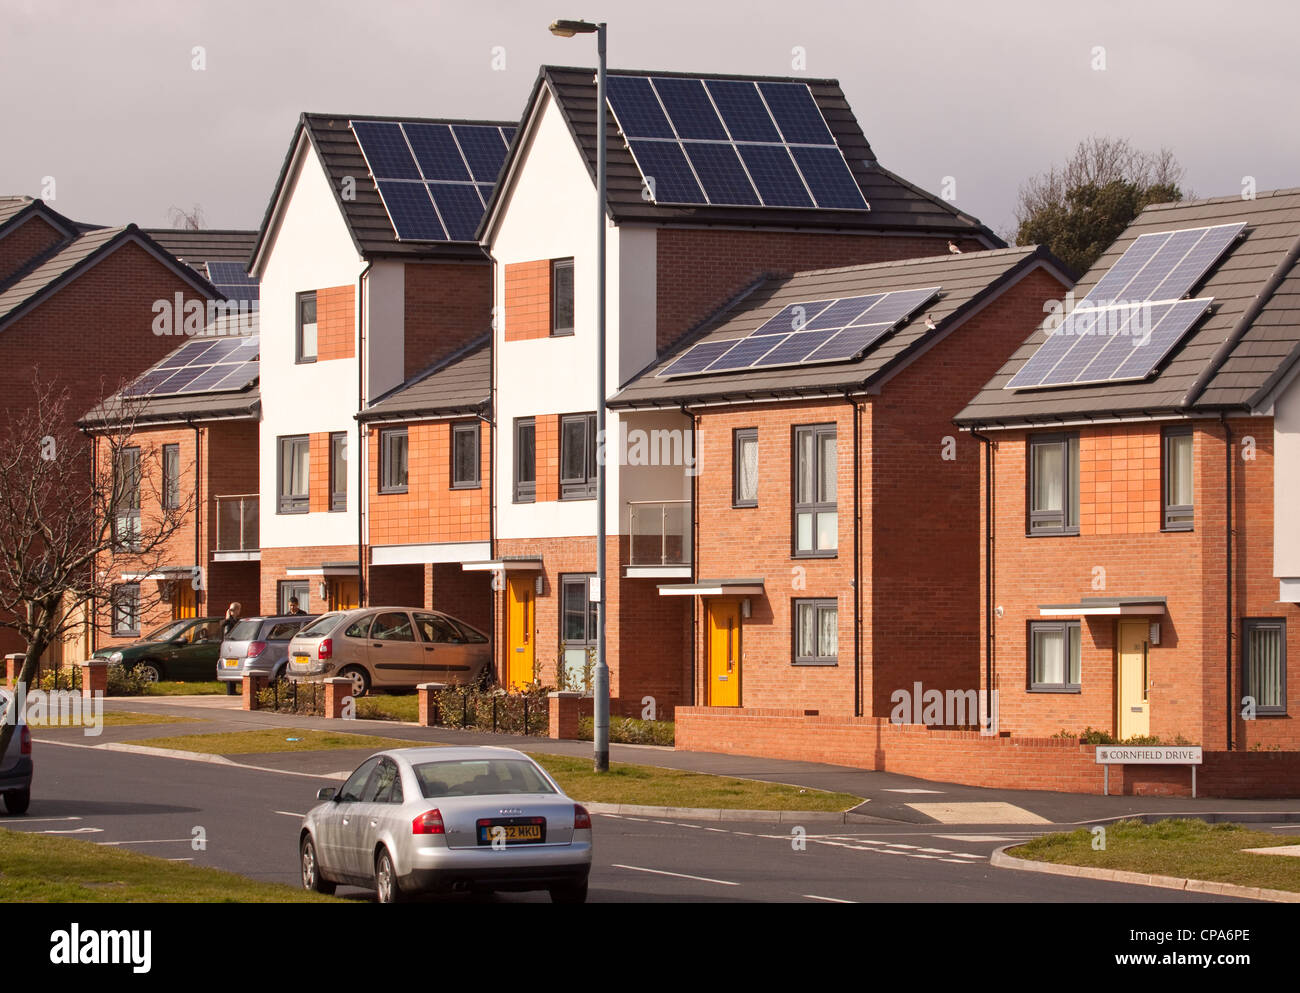 New housing with Photovoltaic solar panels systems on roof, Birmingham, England, UK Stock Photo